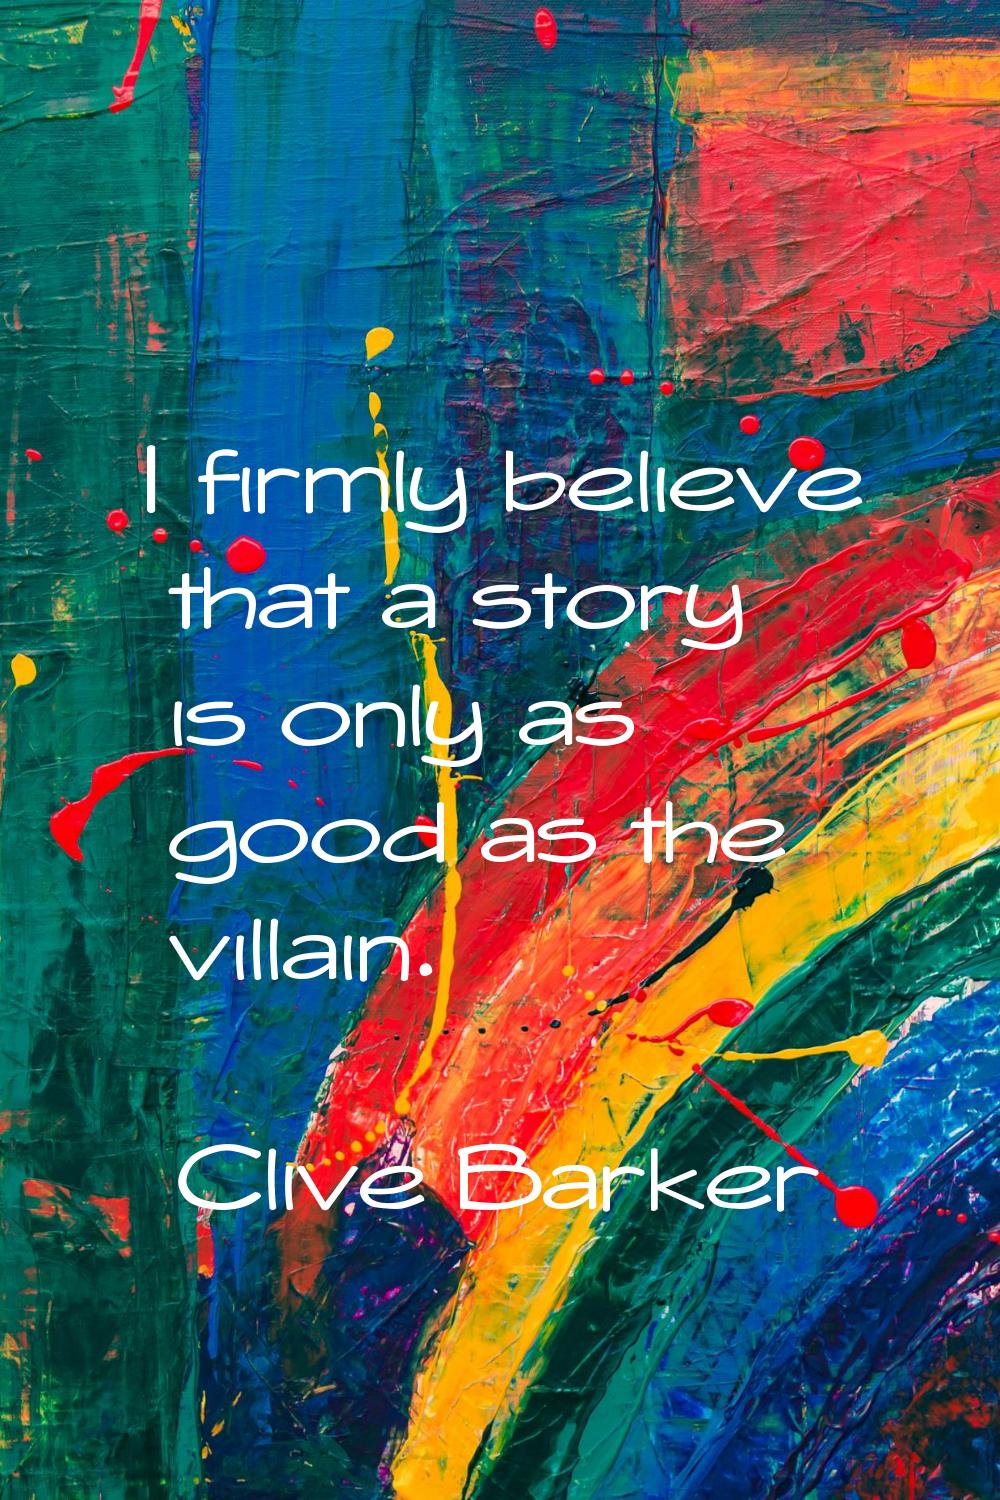 I firmly believe that a story is only as good as the villain.